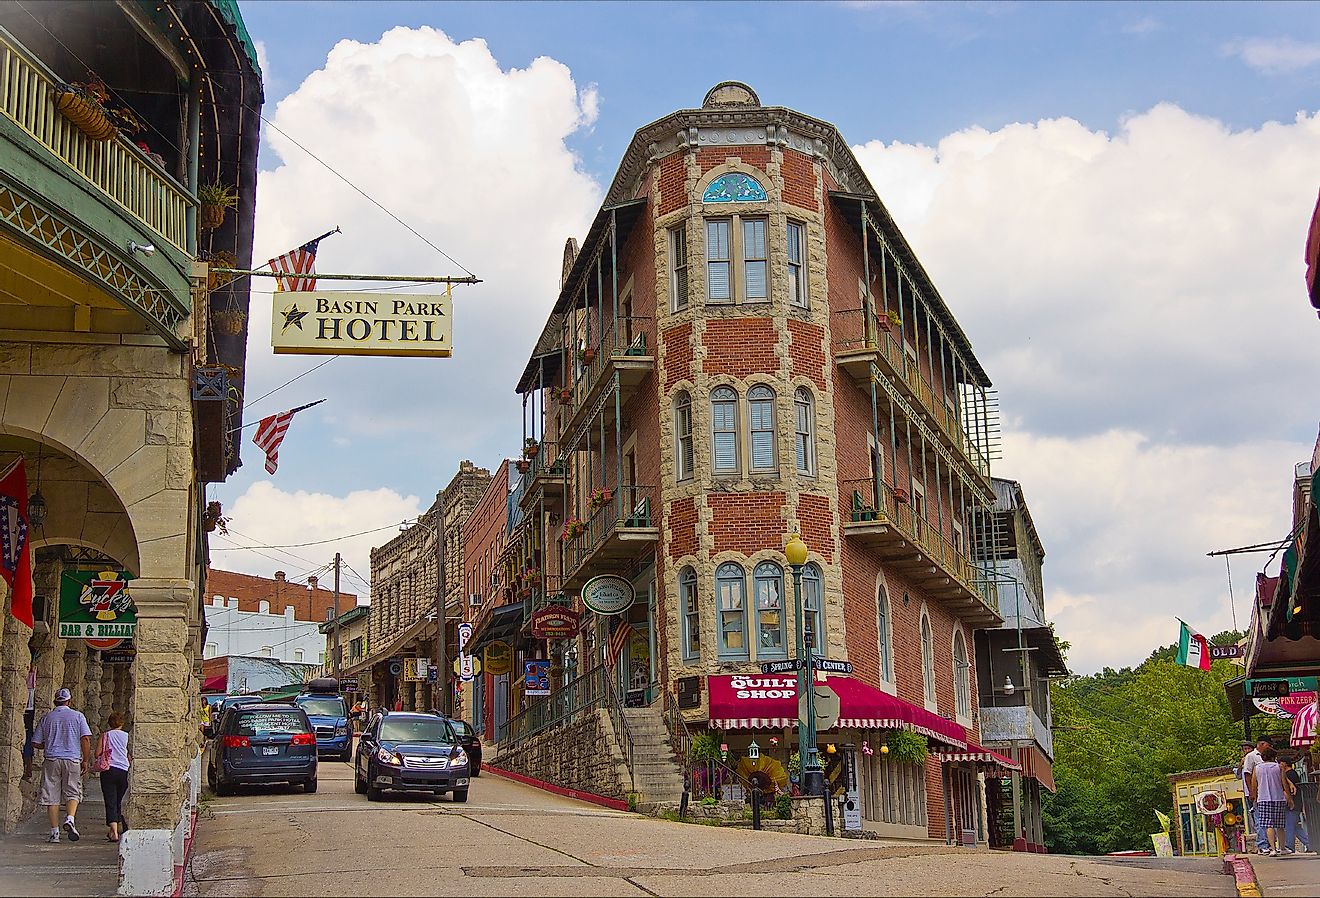 Spring and Center Streets in Eureka Springs, Arkansas. Image credit doug_wertman, CC BY 2.0 <https://creativecommons.org/licenses/by/2.0>, via Wikimedia Commons